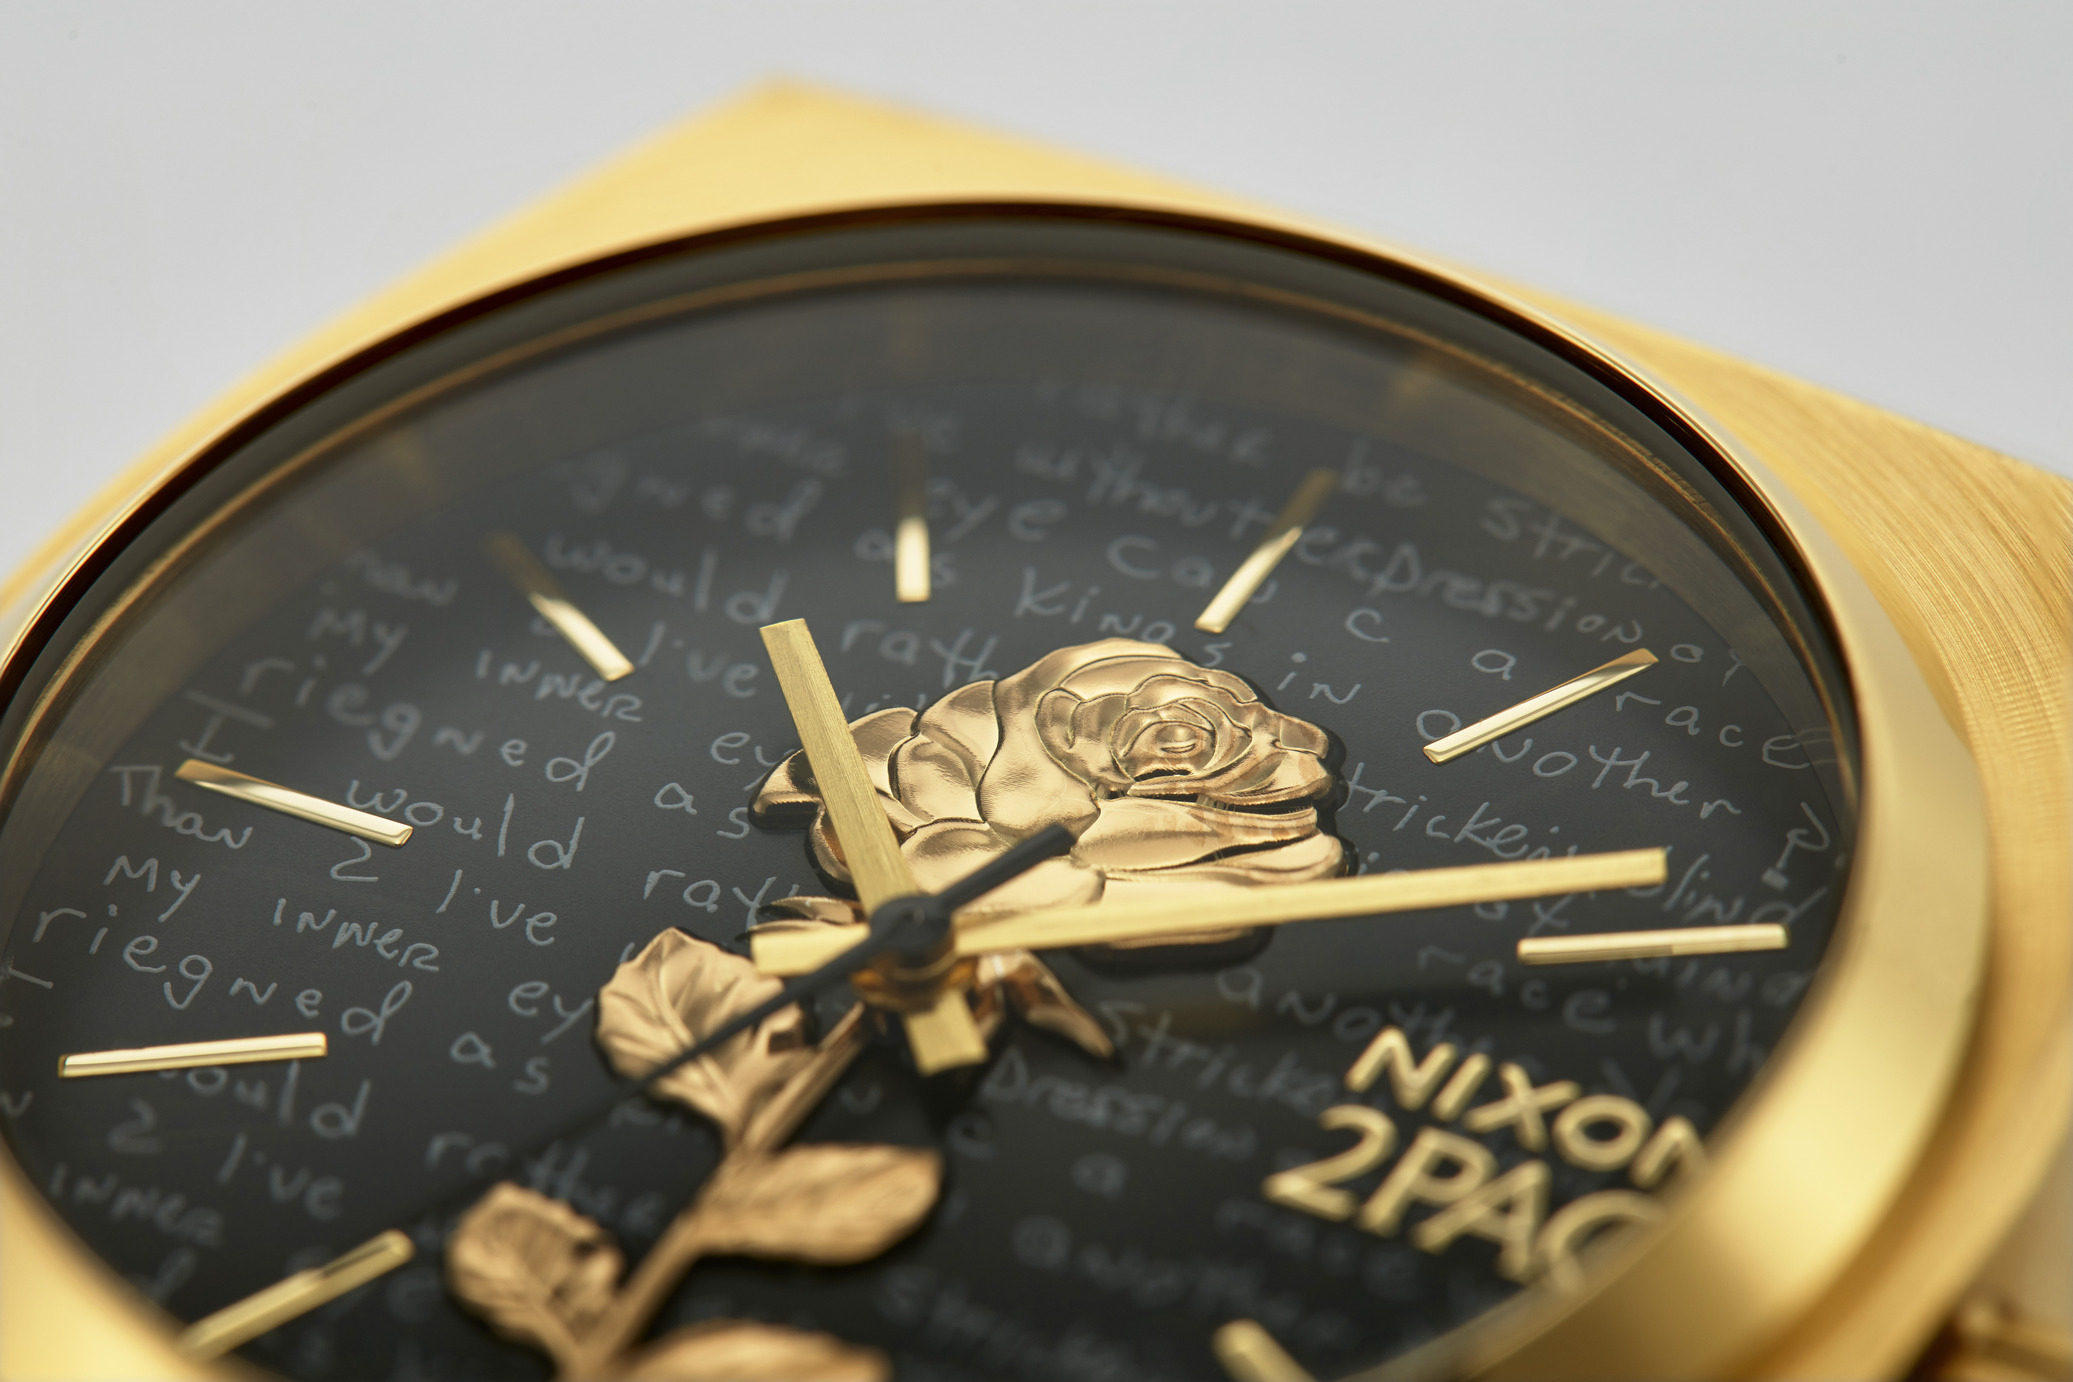 Time Teller 2PAC Collab Watch, Gold / Black